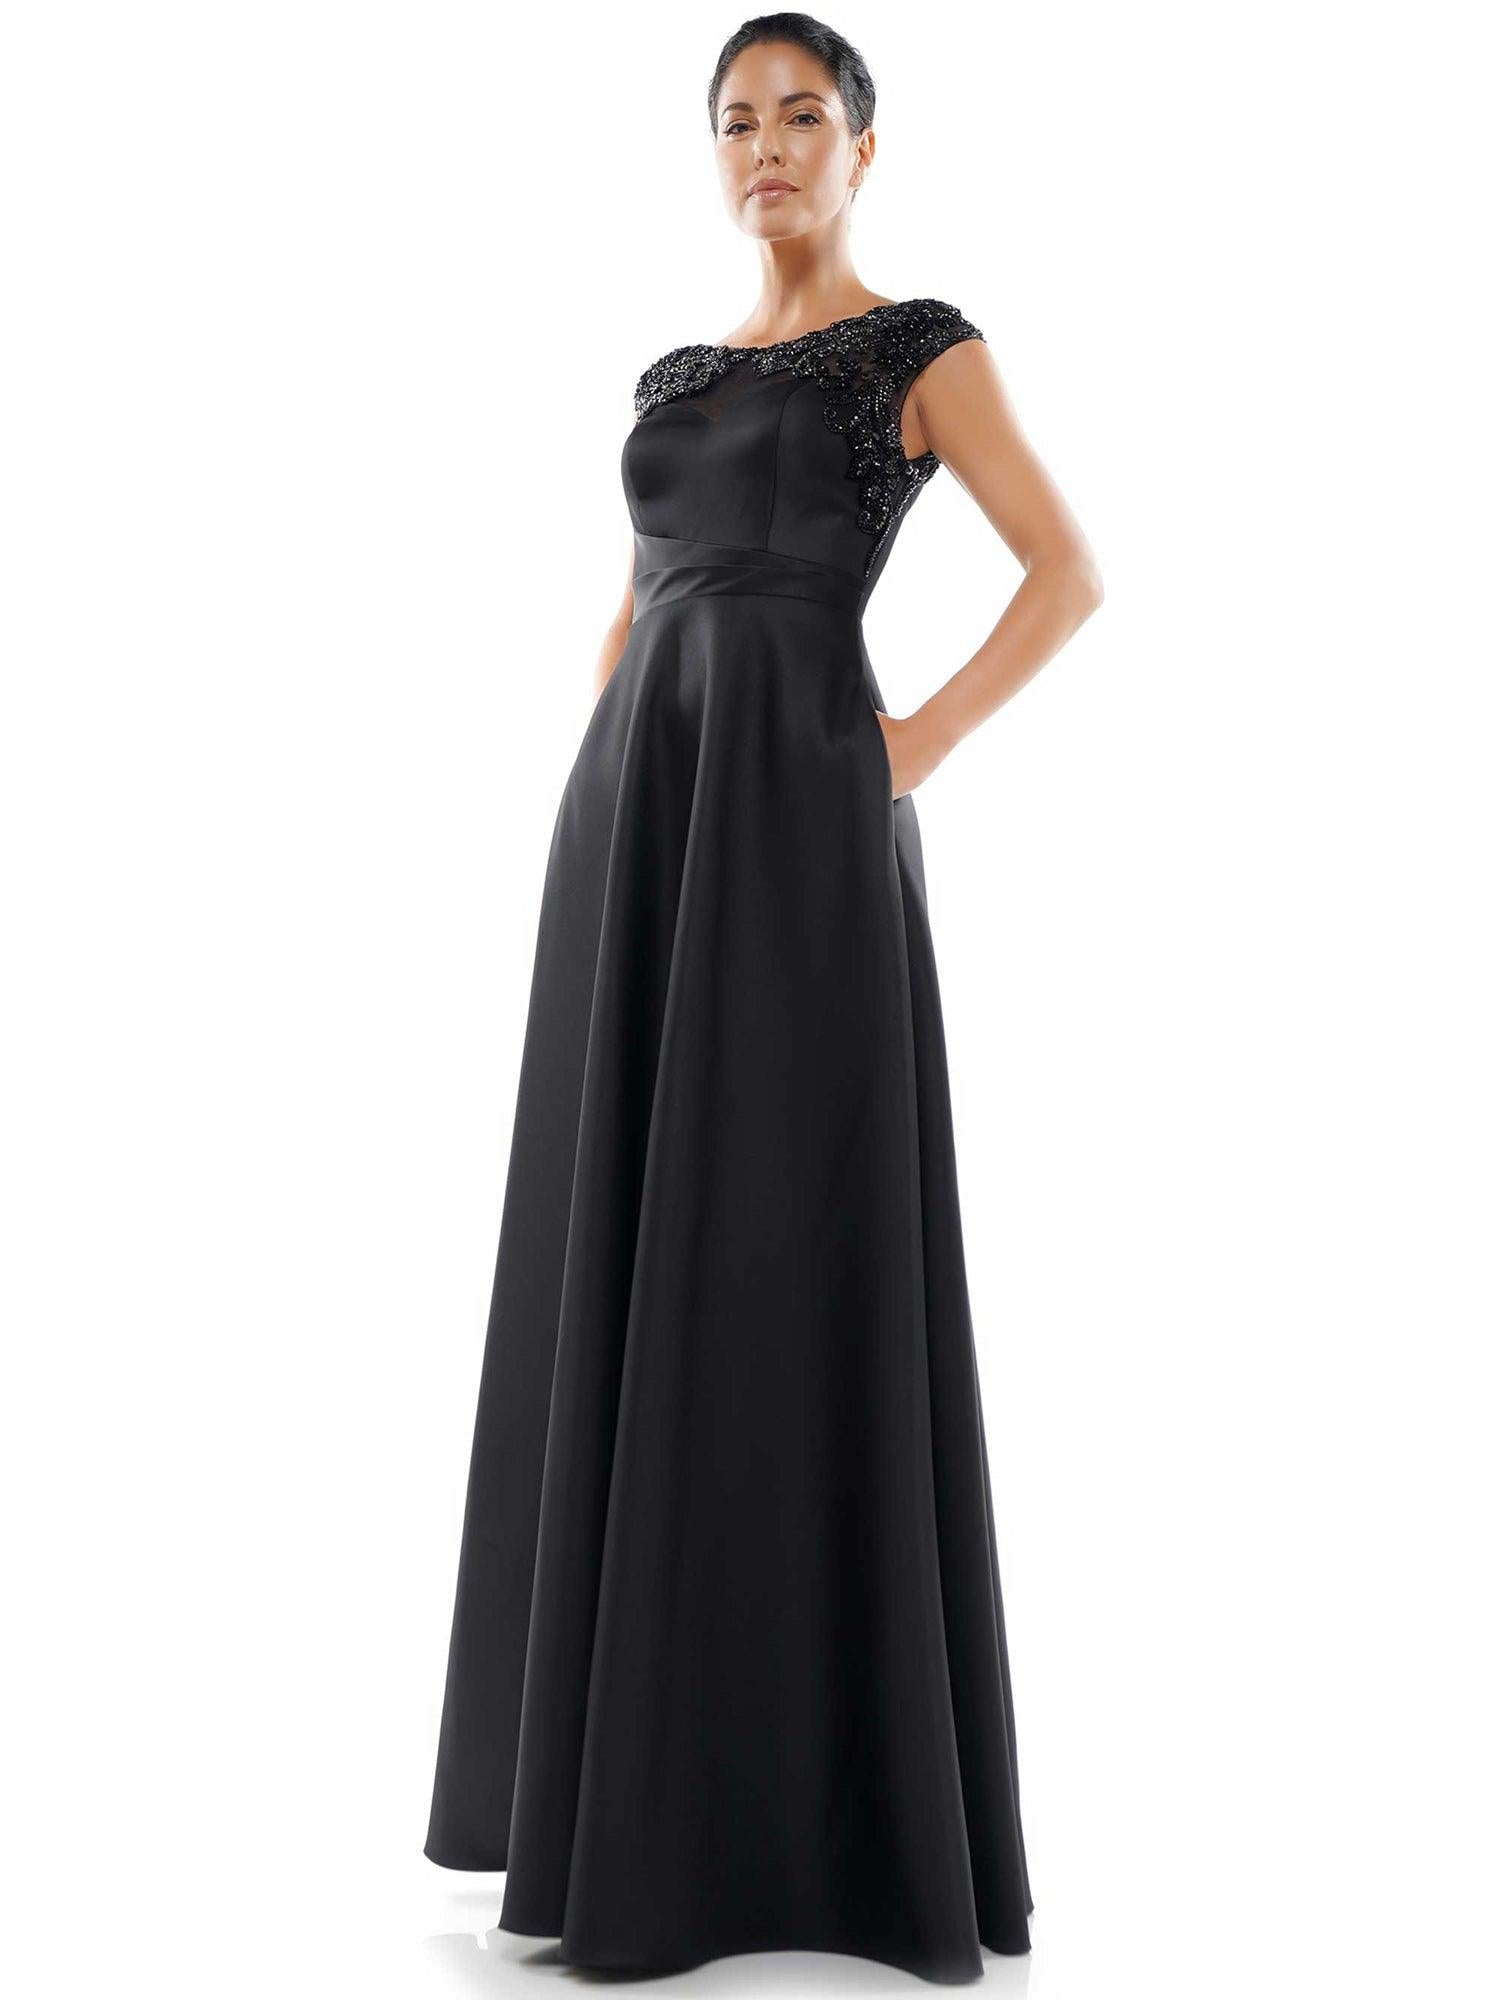 Marsoni Mother of the Bride A Line Long Dress 1005 - The Dress Outlet